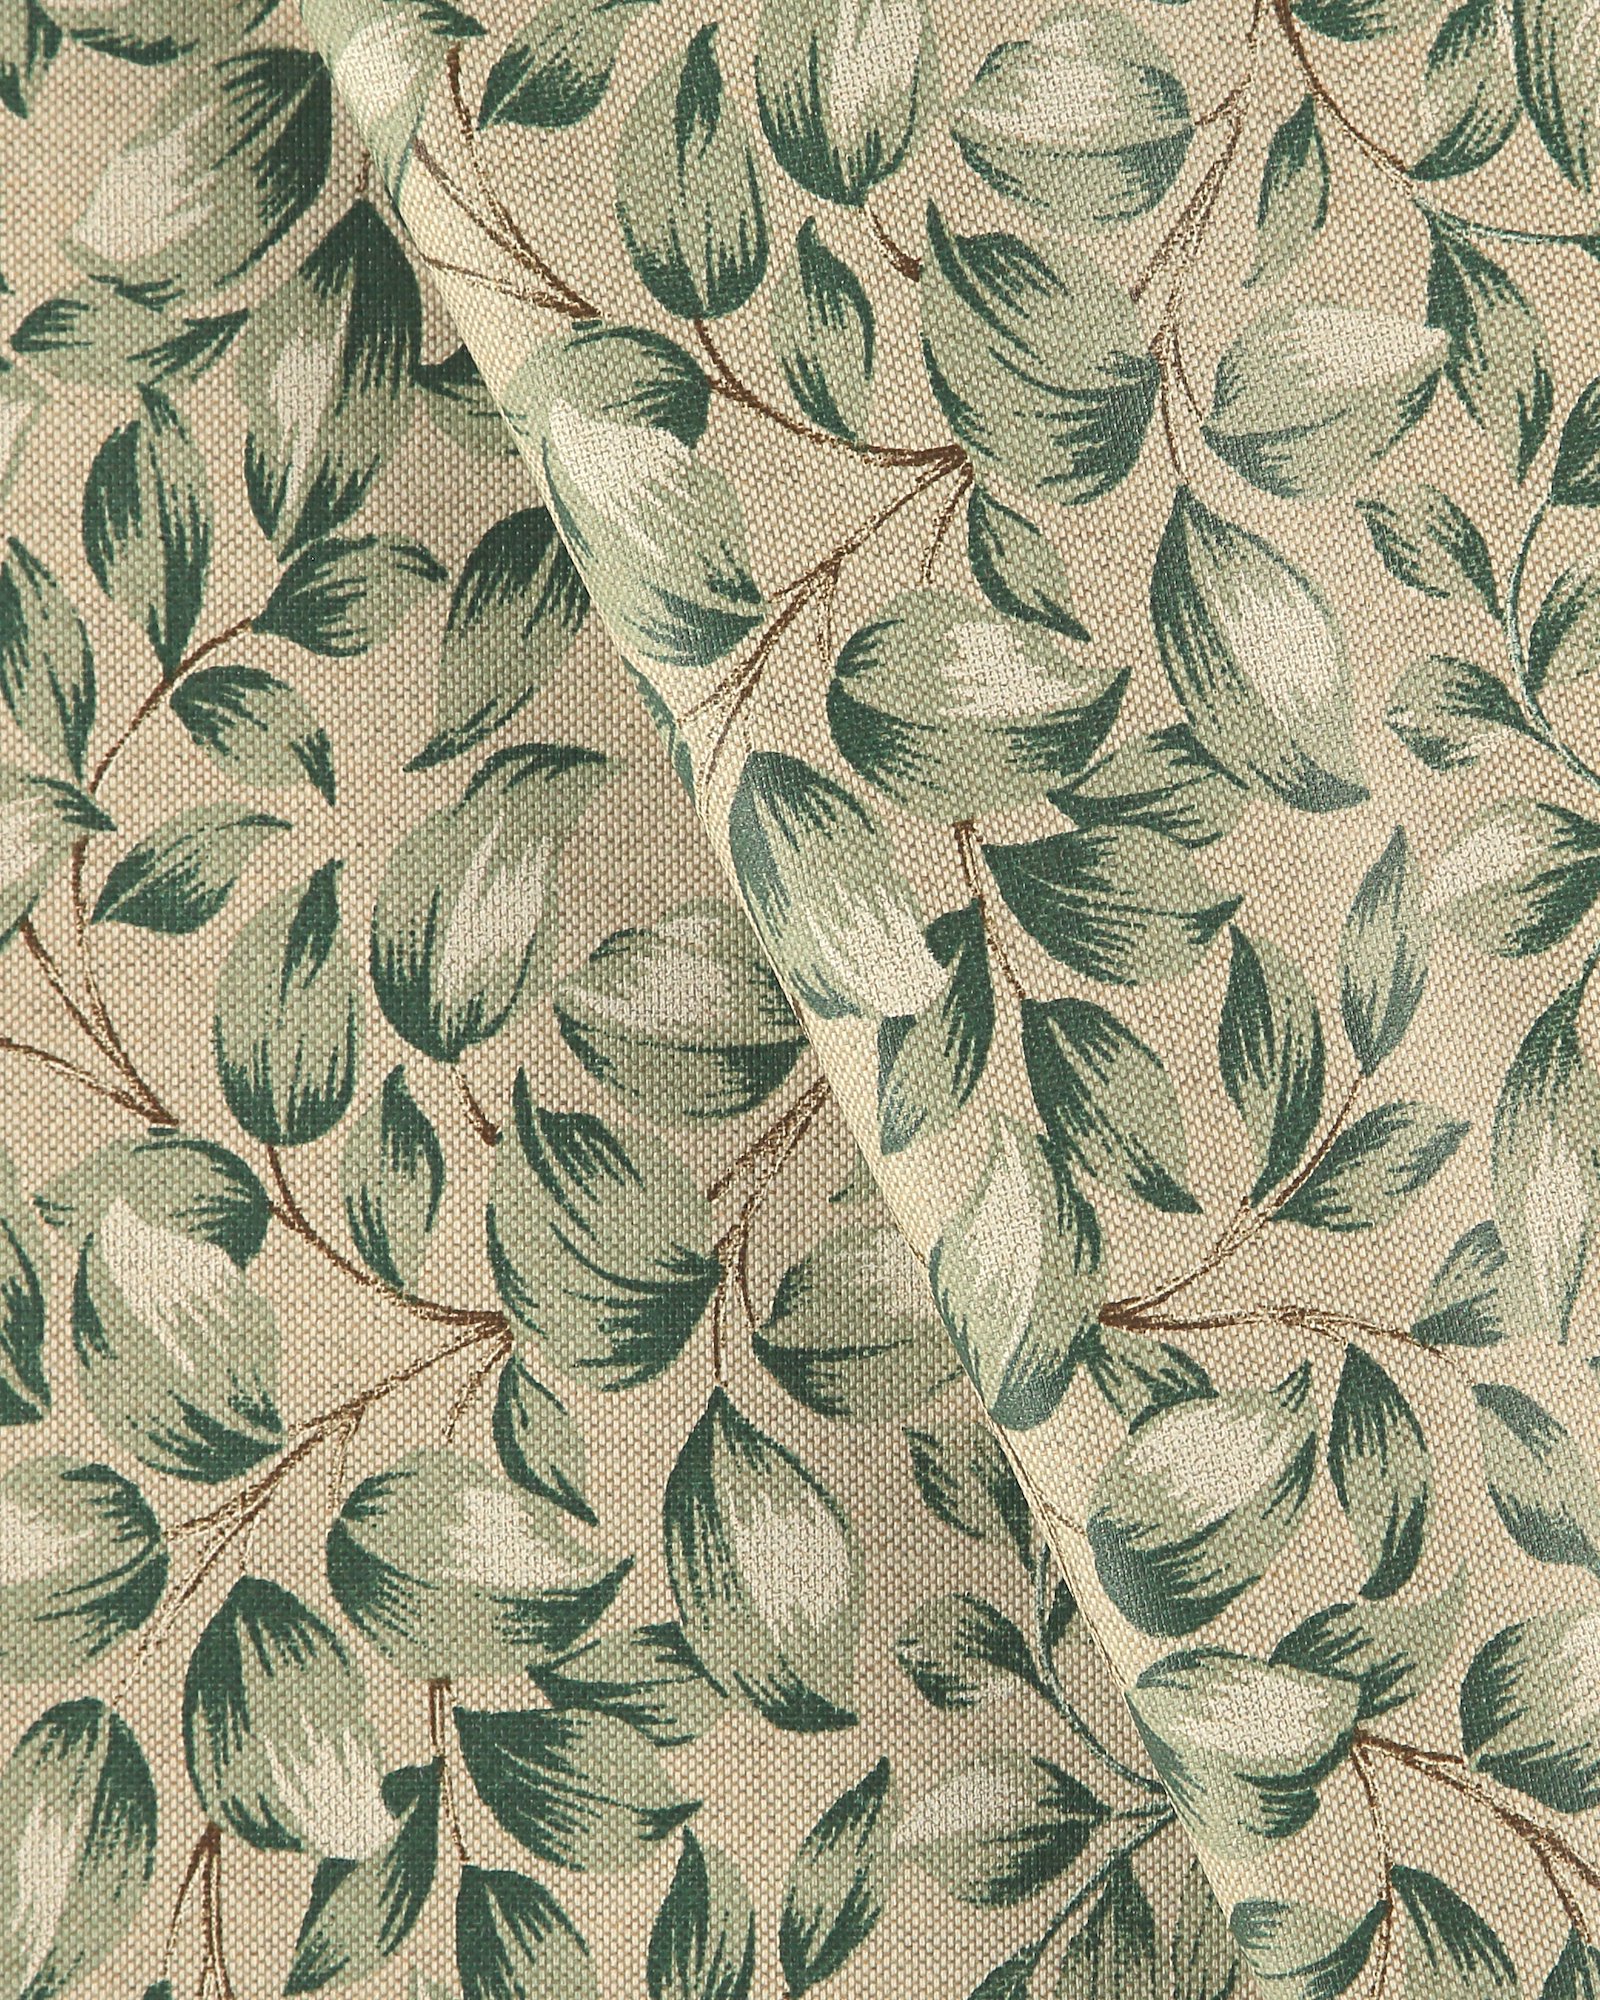 Woven oilcloth linenlook w green leaves 872297_pack